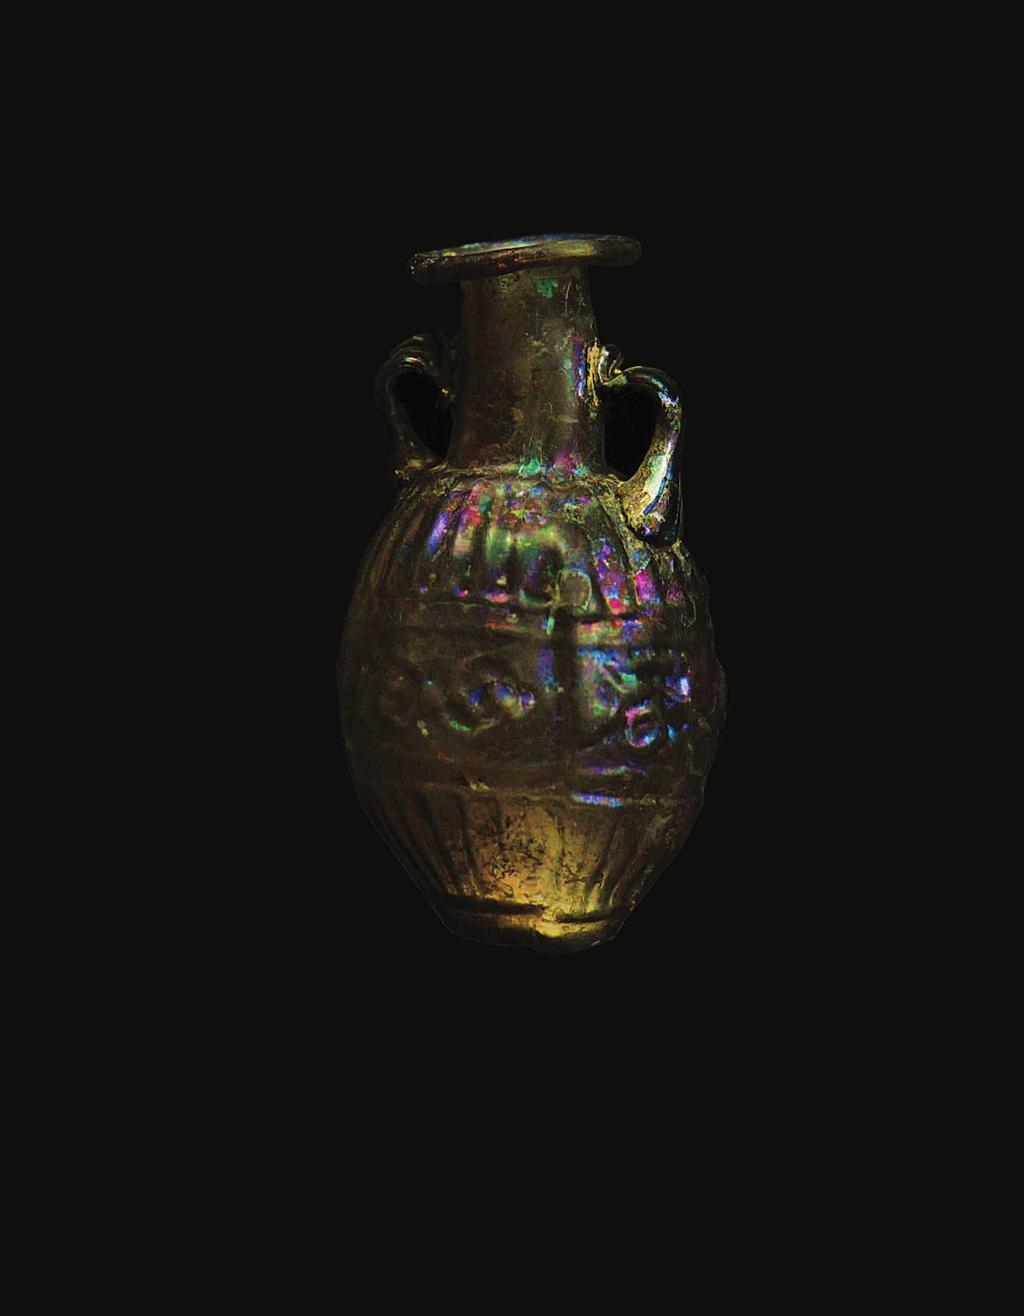 ANCIENT GLASS SIDONIAN GLASS VASE WITH SCROLL PATTERN Light aubergine in color, with ovoid body of this vessel being blown in a two-part mold.